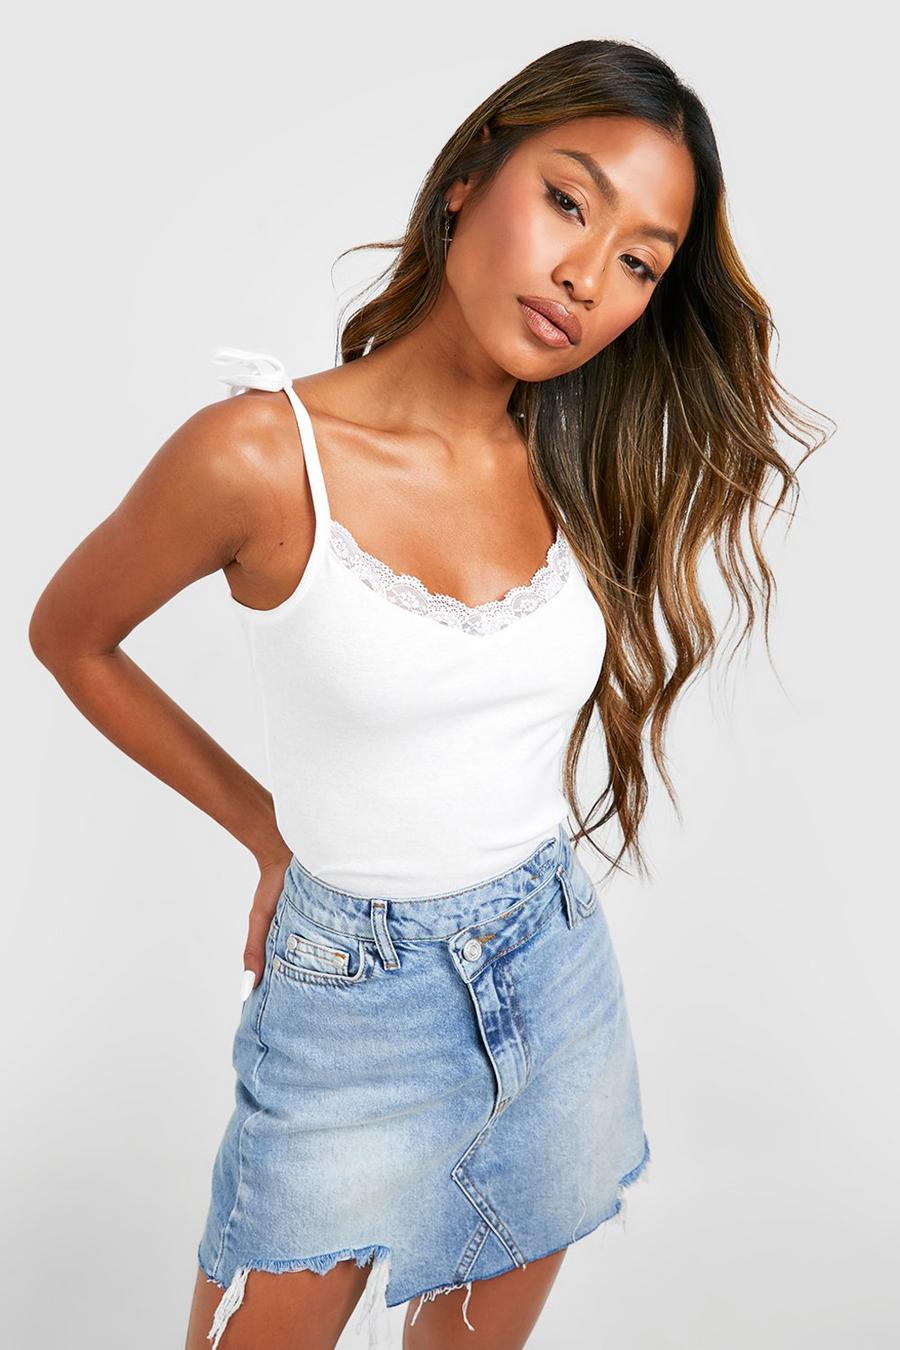  Other Stories cotton lace trim tank top in off white